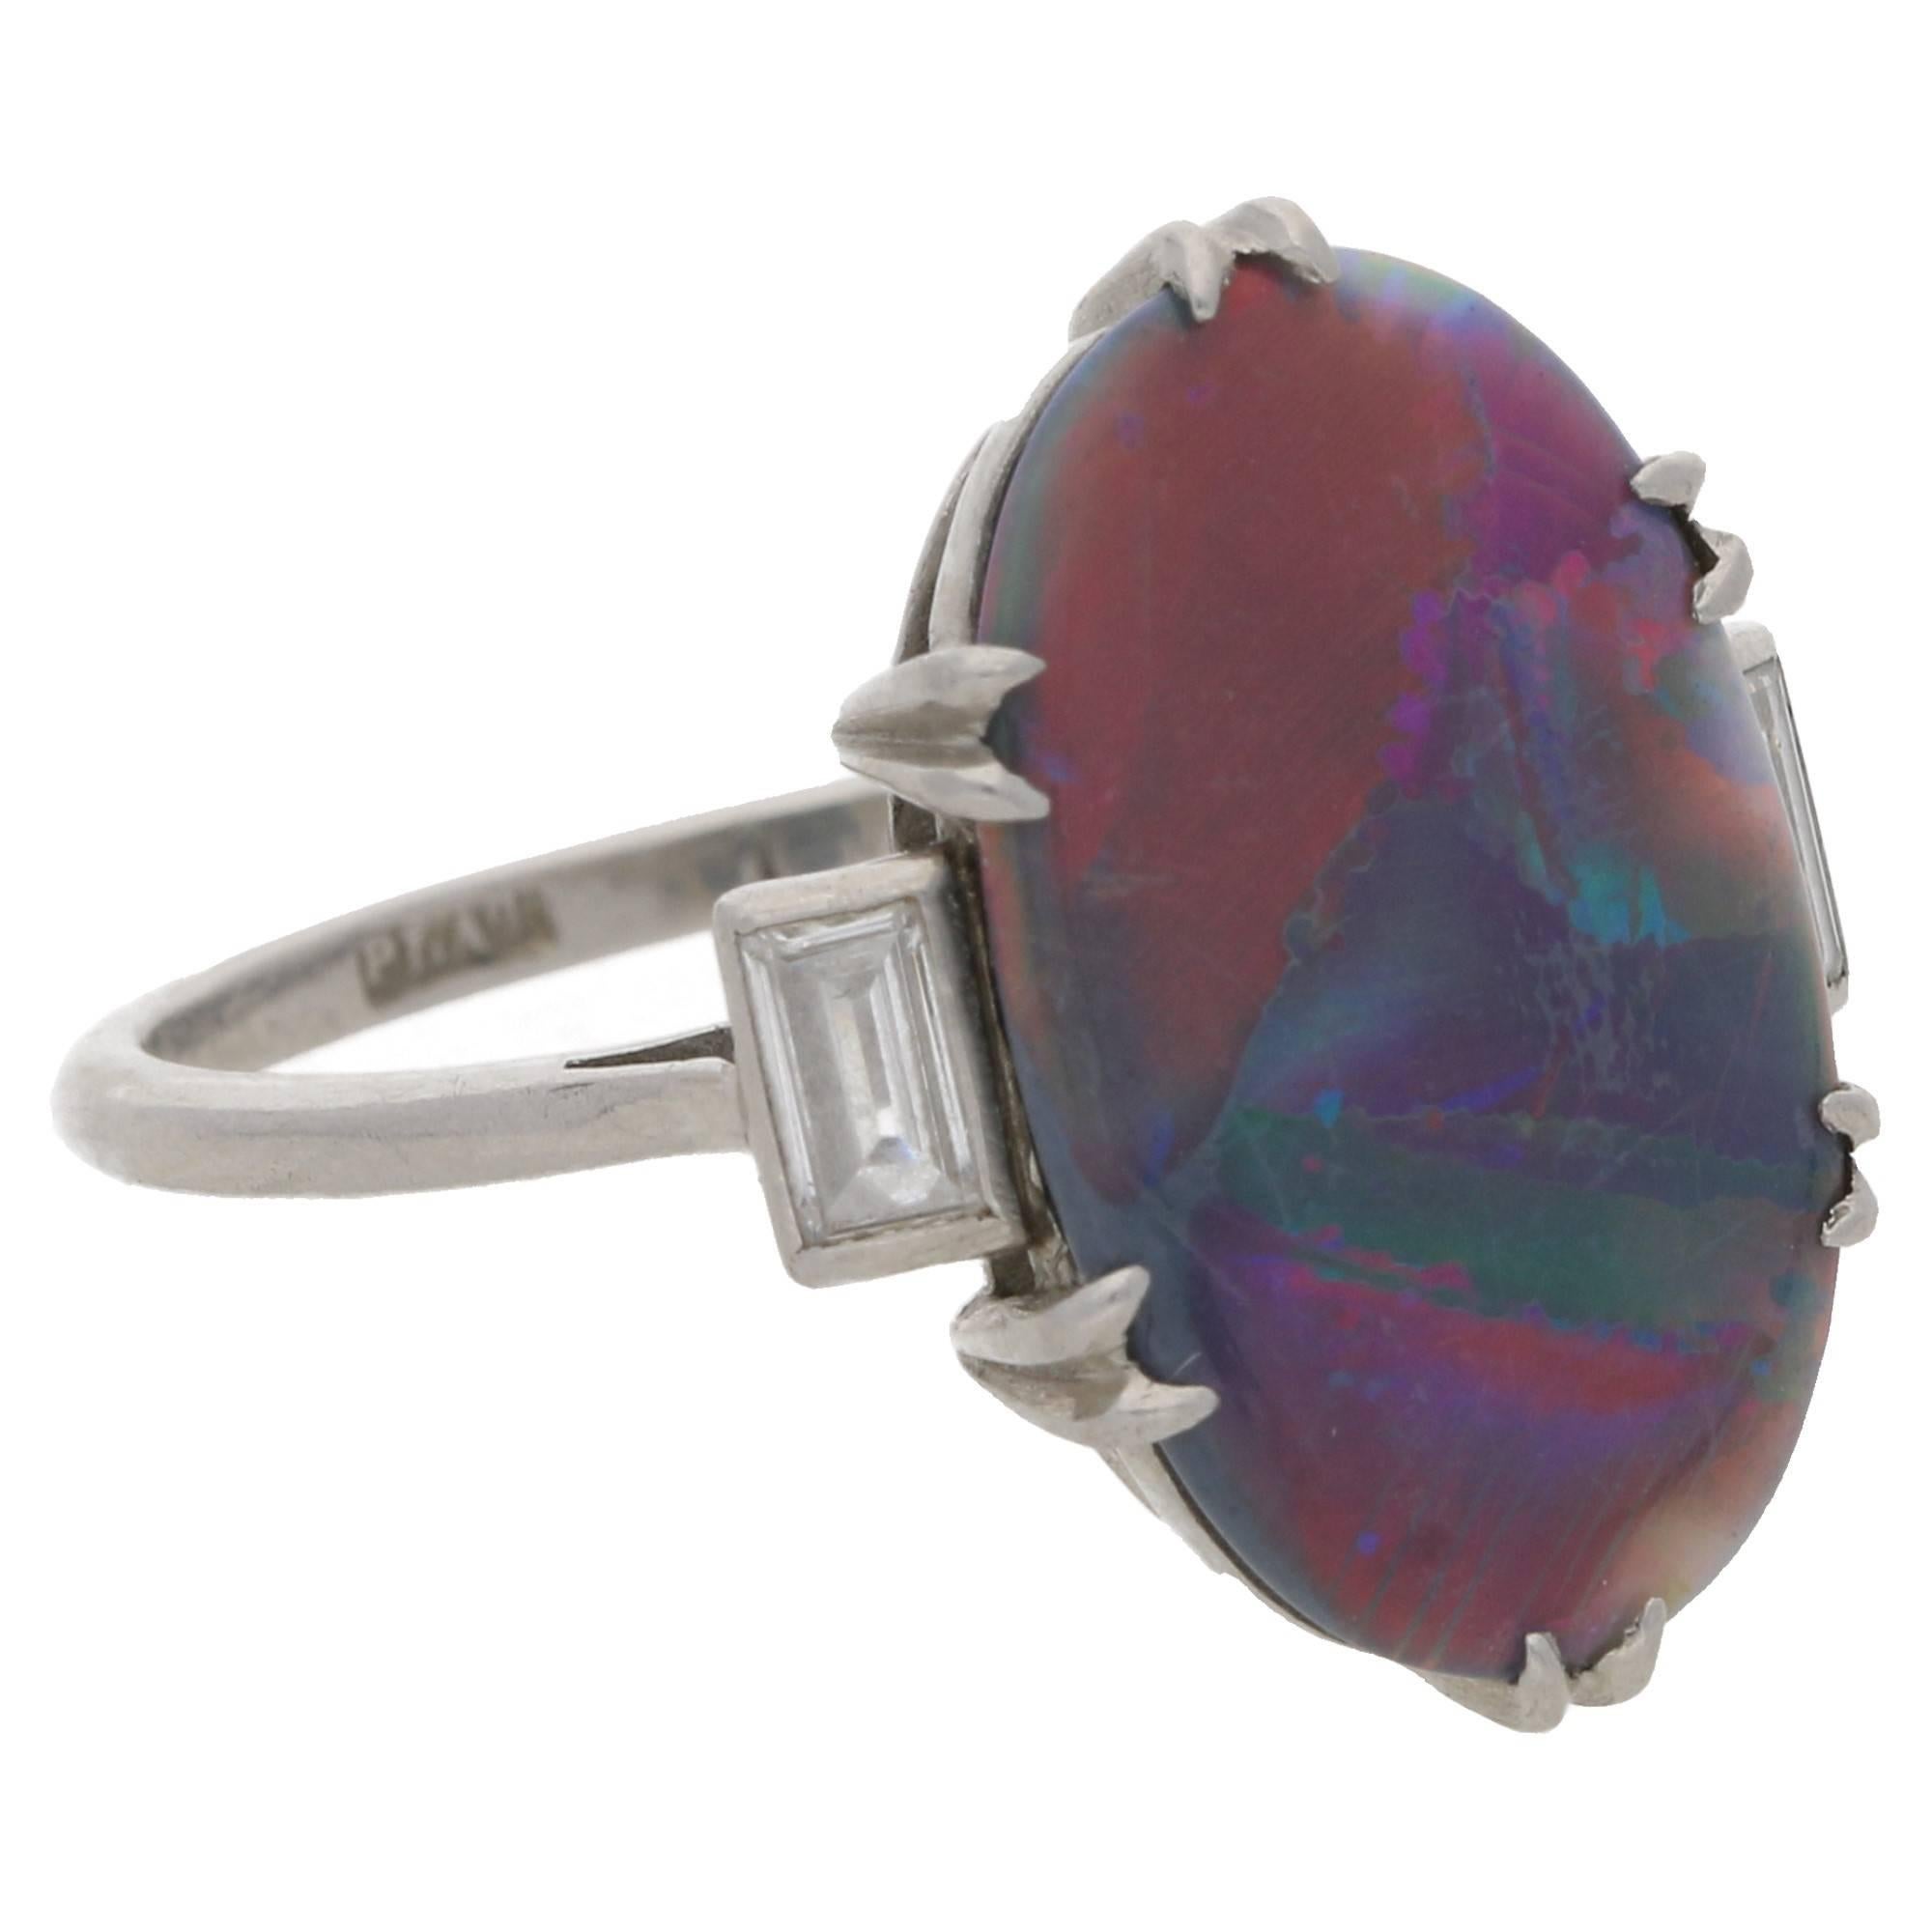 An impressive Art Deco harlequin black opal and diamond ring in platinum, circa 1935. The ring is set with an oval-shaped cabochon natural unenhanced harlequin black opal in an open-back double talon claw setting with approximately 1.50 carats,